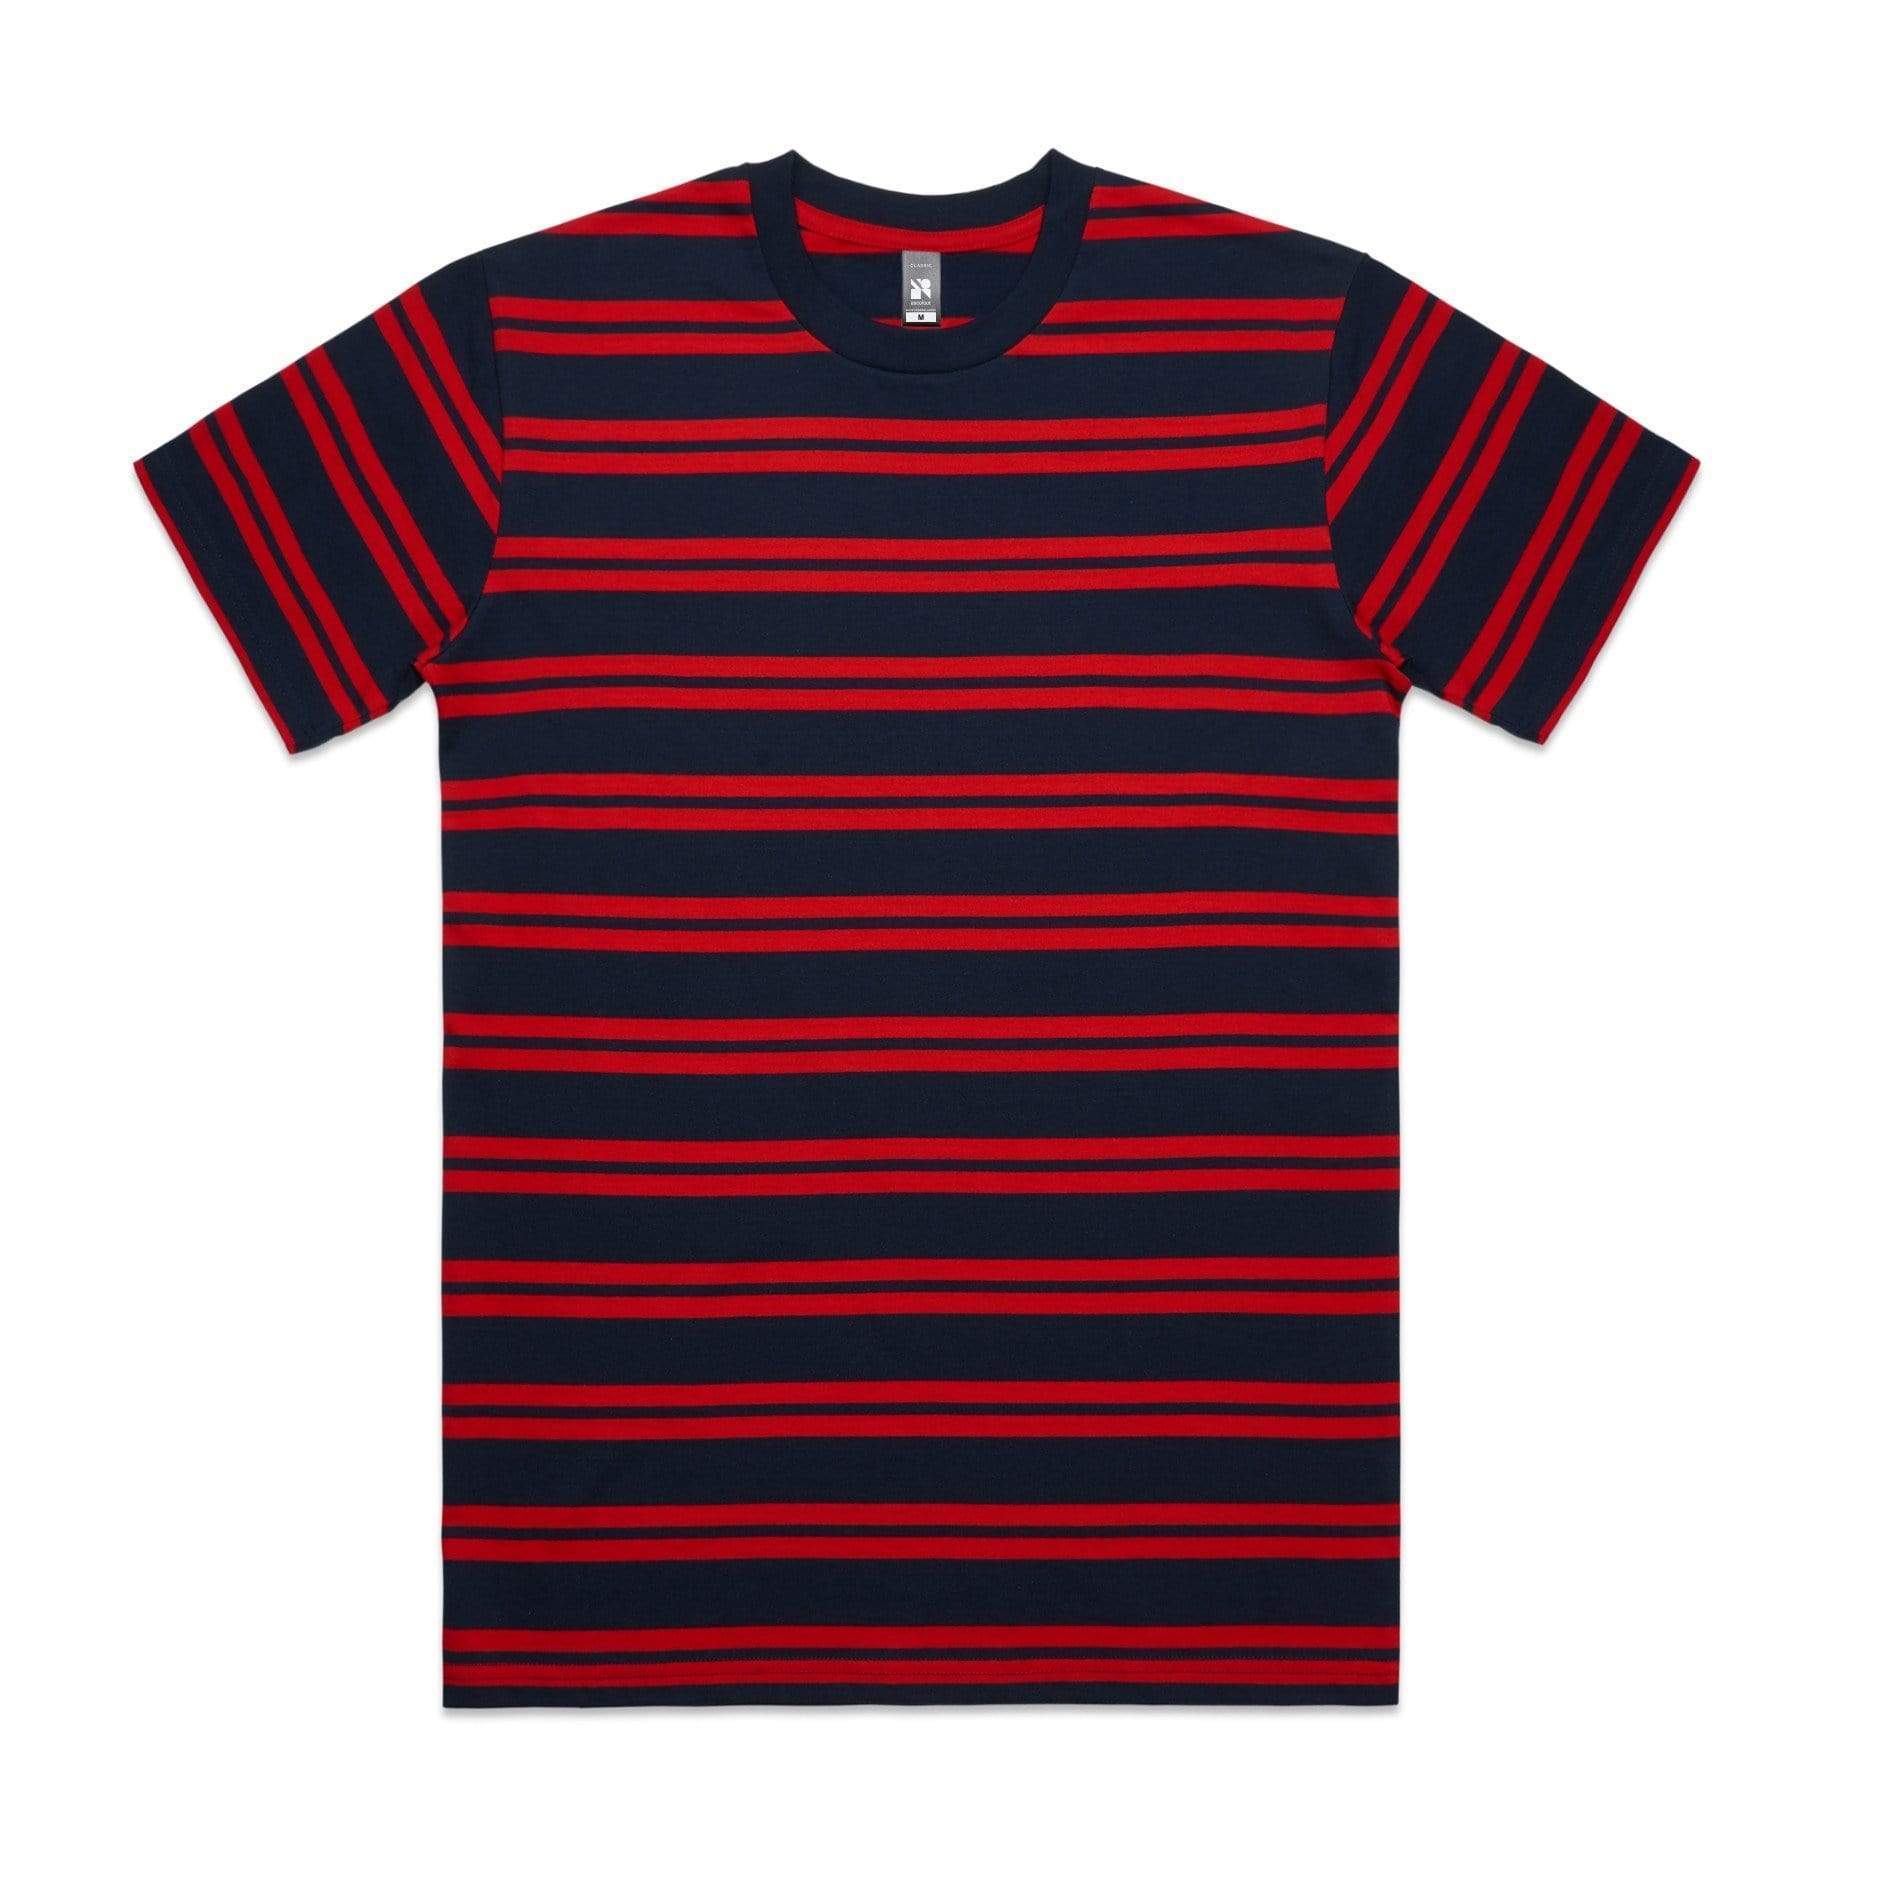 As Colour Casual Wear NAVY/RED / XSM As Colour Men's classic stripe tee 5044